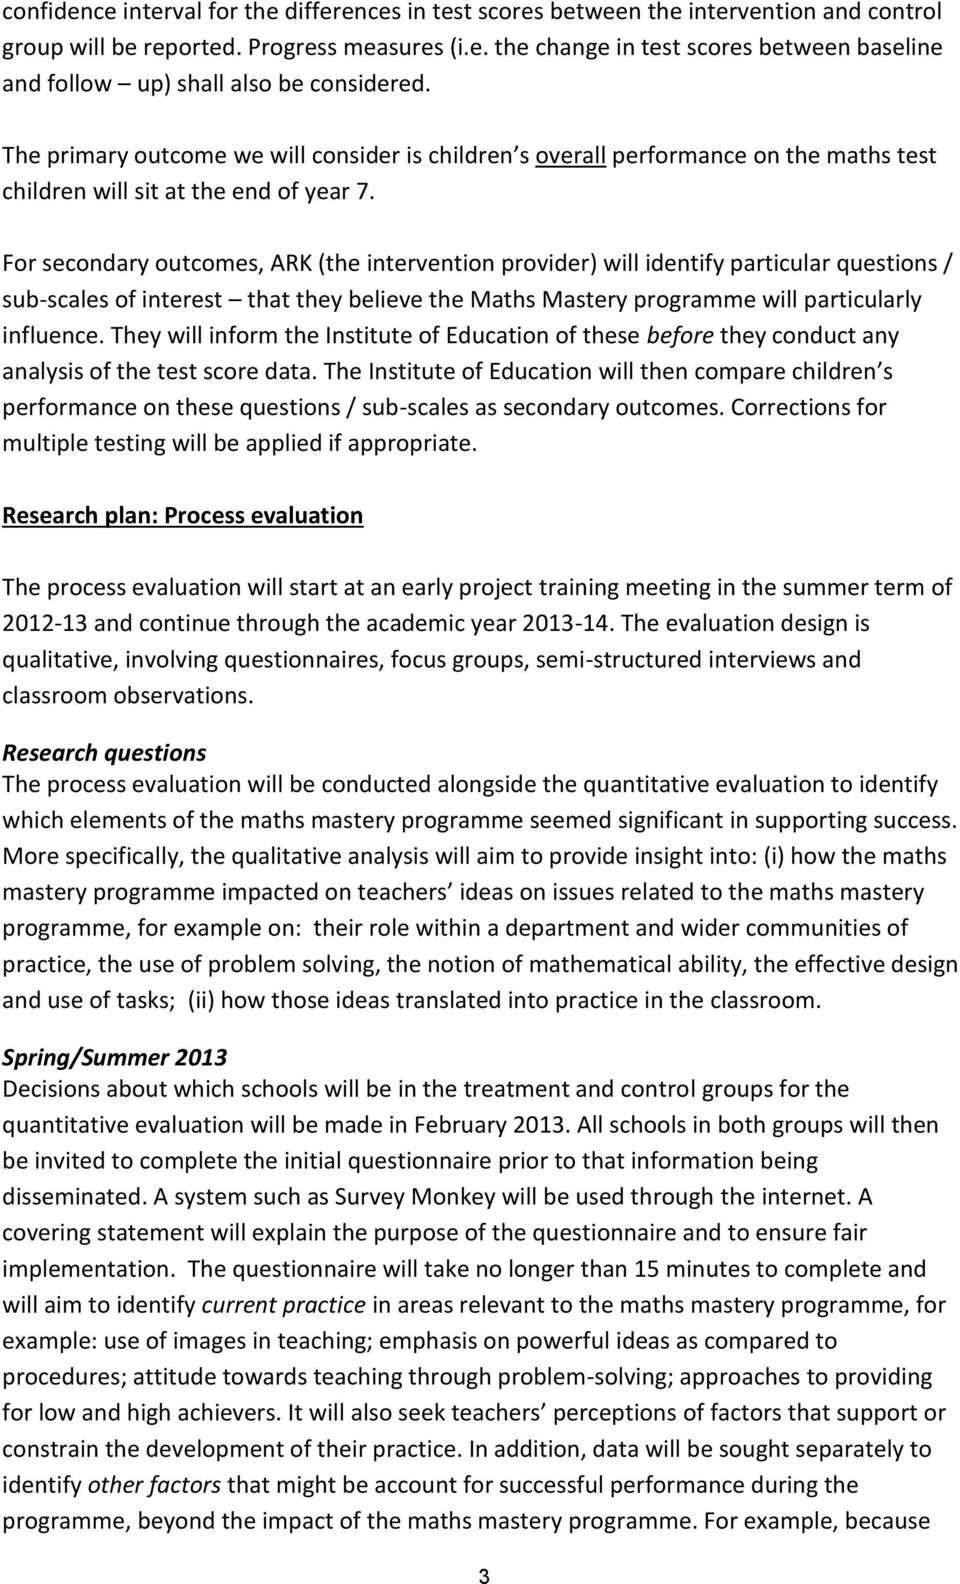 For secondary outcomes, ARK (the intervention provider) will identify particular questions / sub-scales of interest that they believe the Maths Mastery programme will particularly influence.